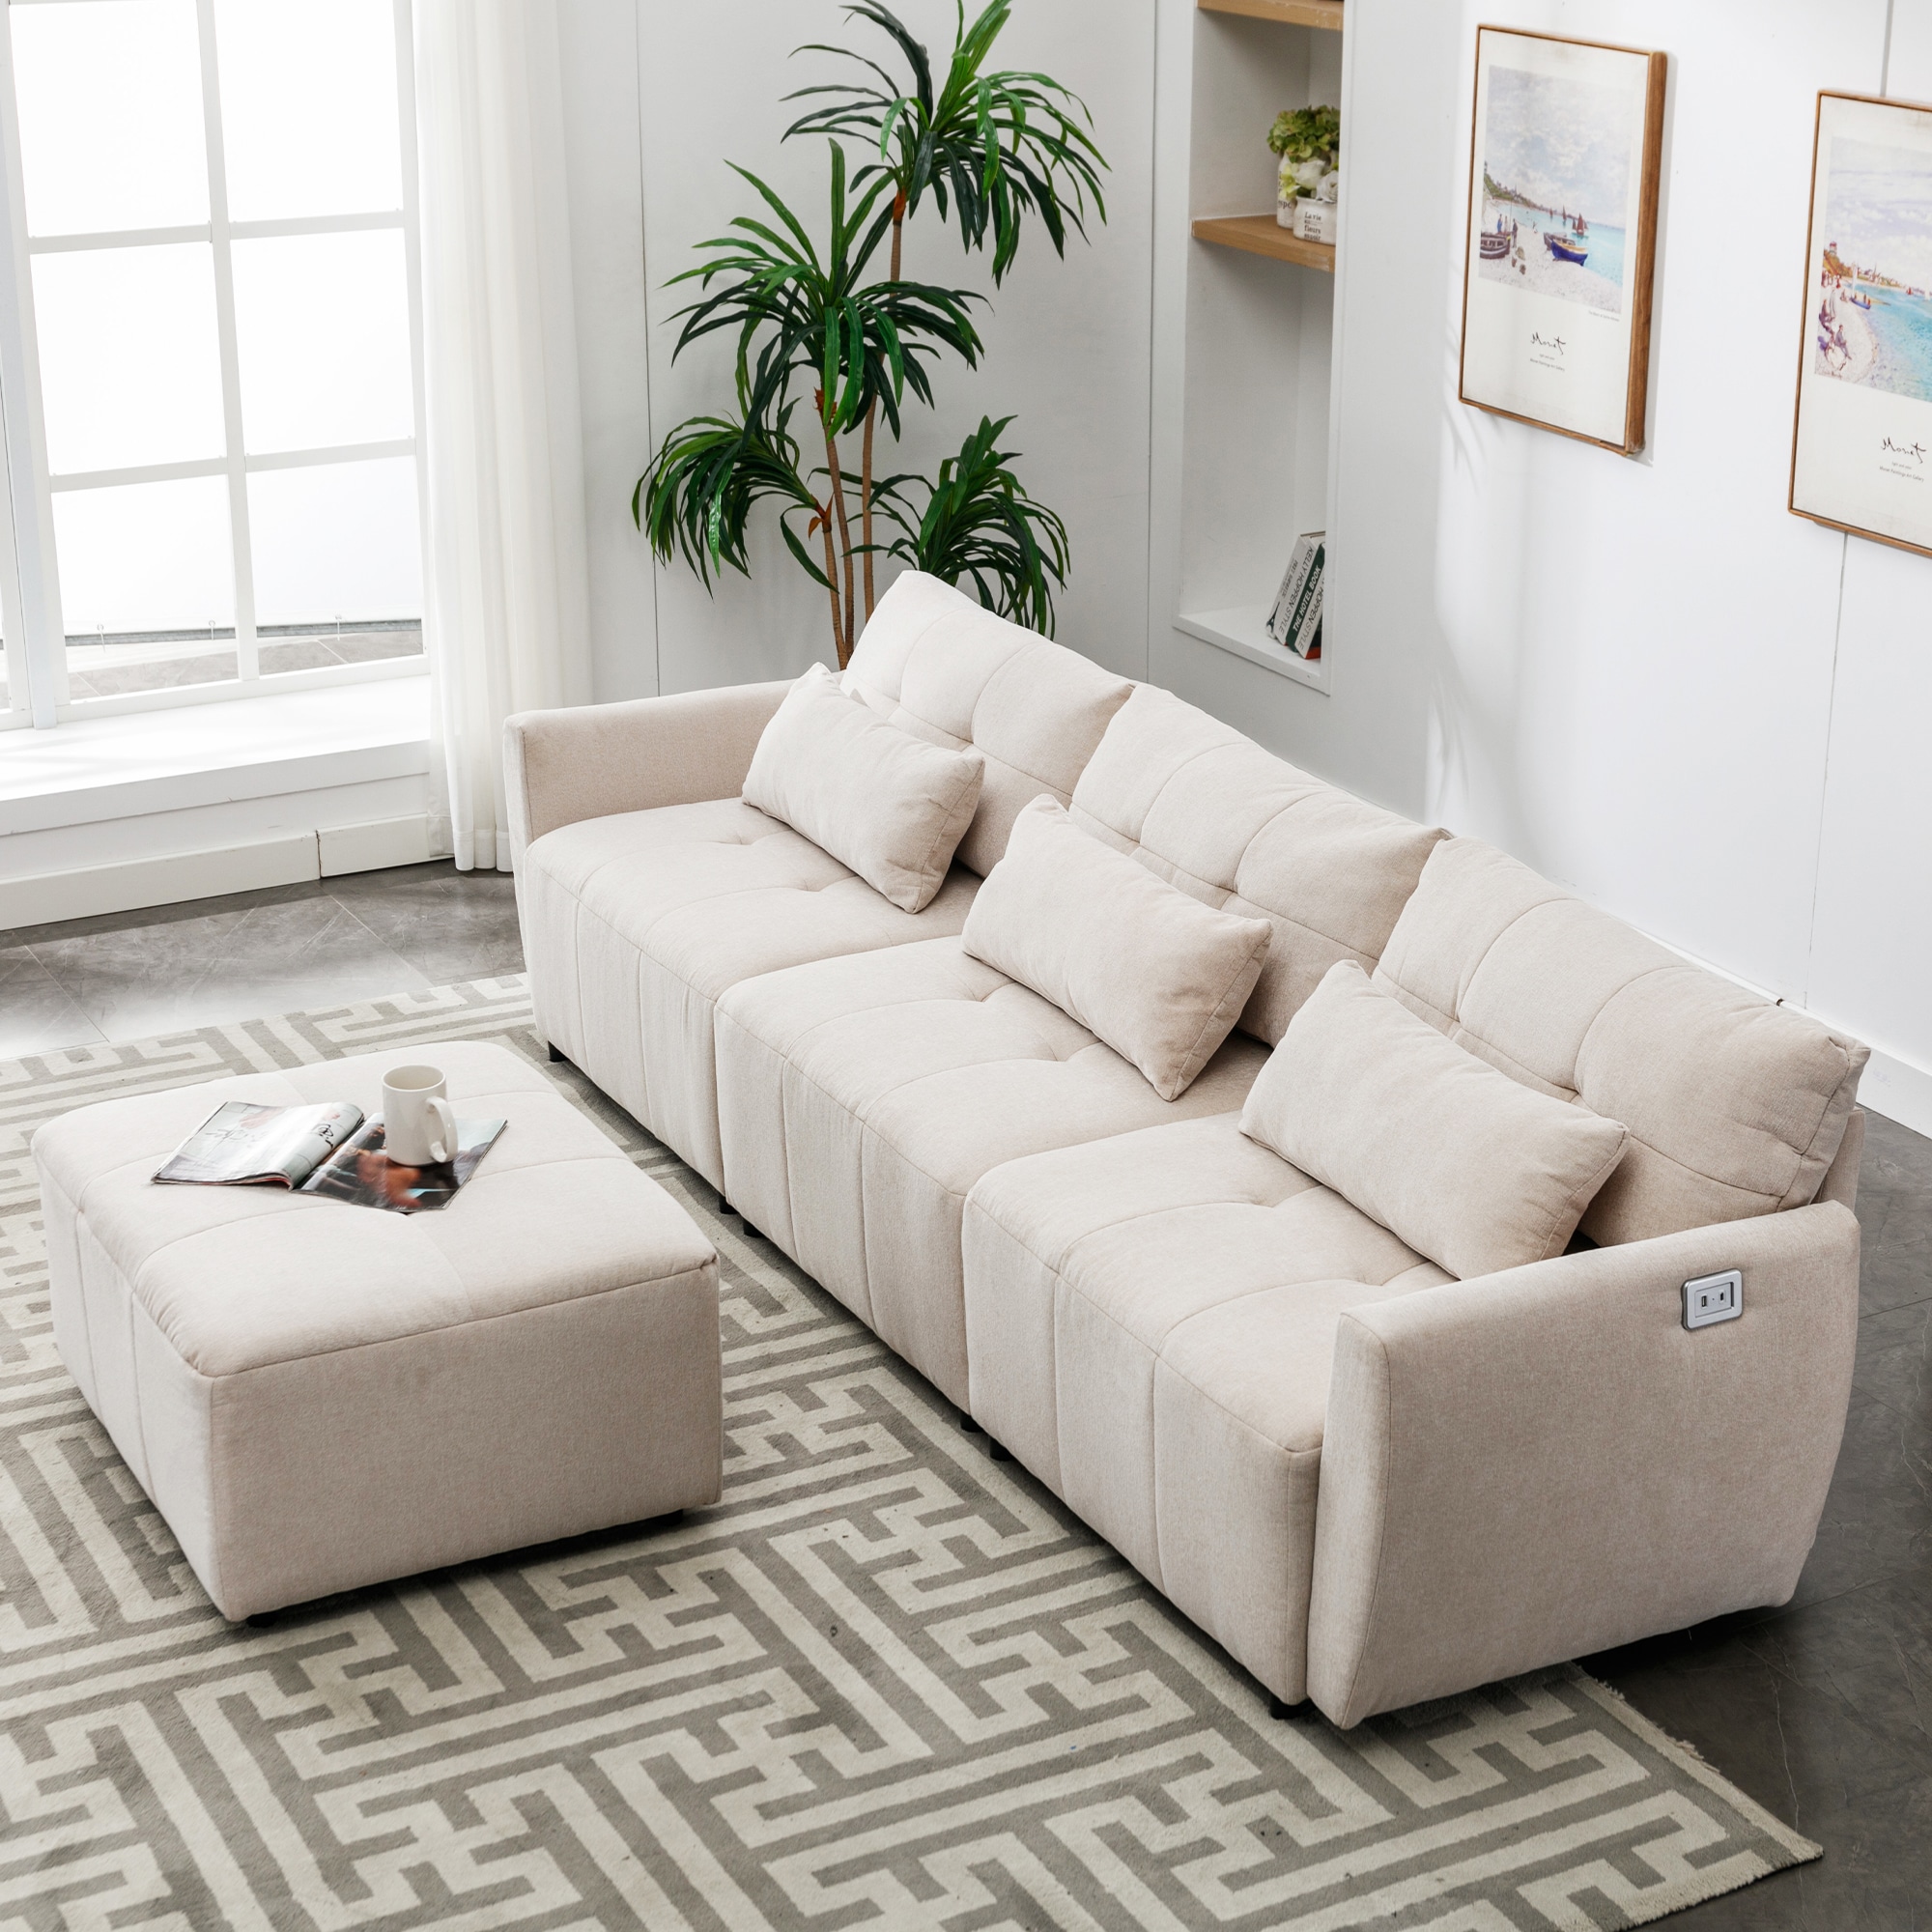 Clihome 3-Seat L-Shaped Sofa with Movable Ottoman 113.3-in Modern Beige ...